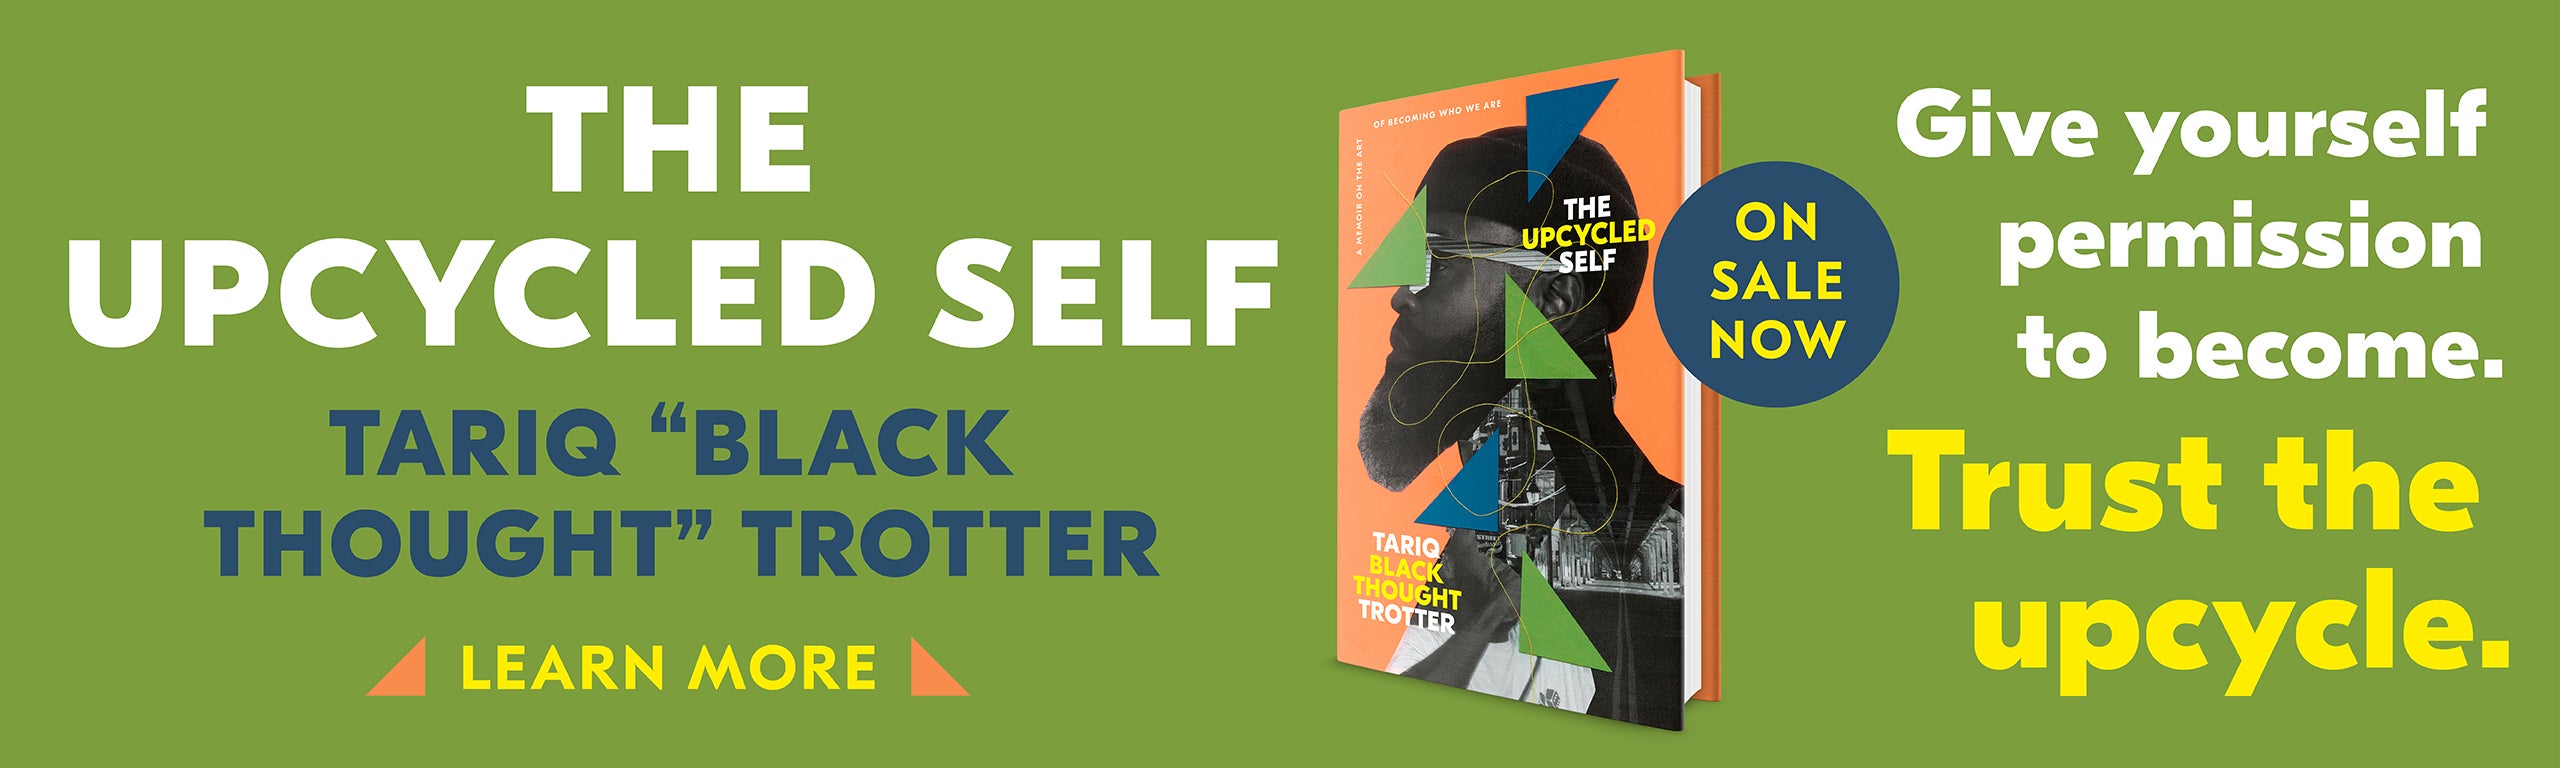 The Upcycled Self by Tariq Trotter. On Sale Now.